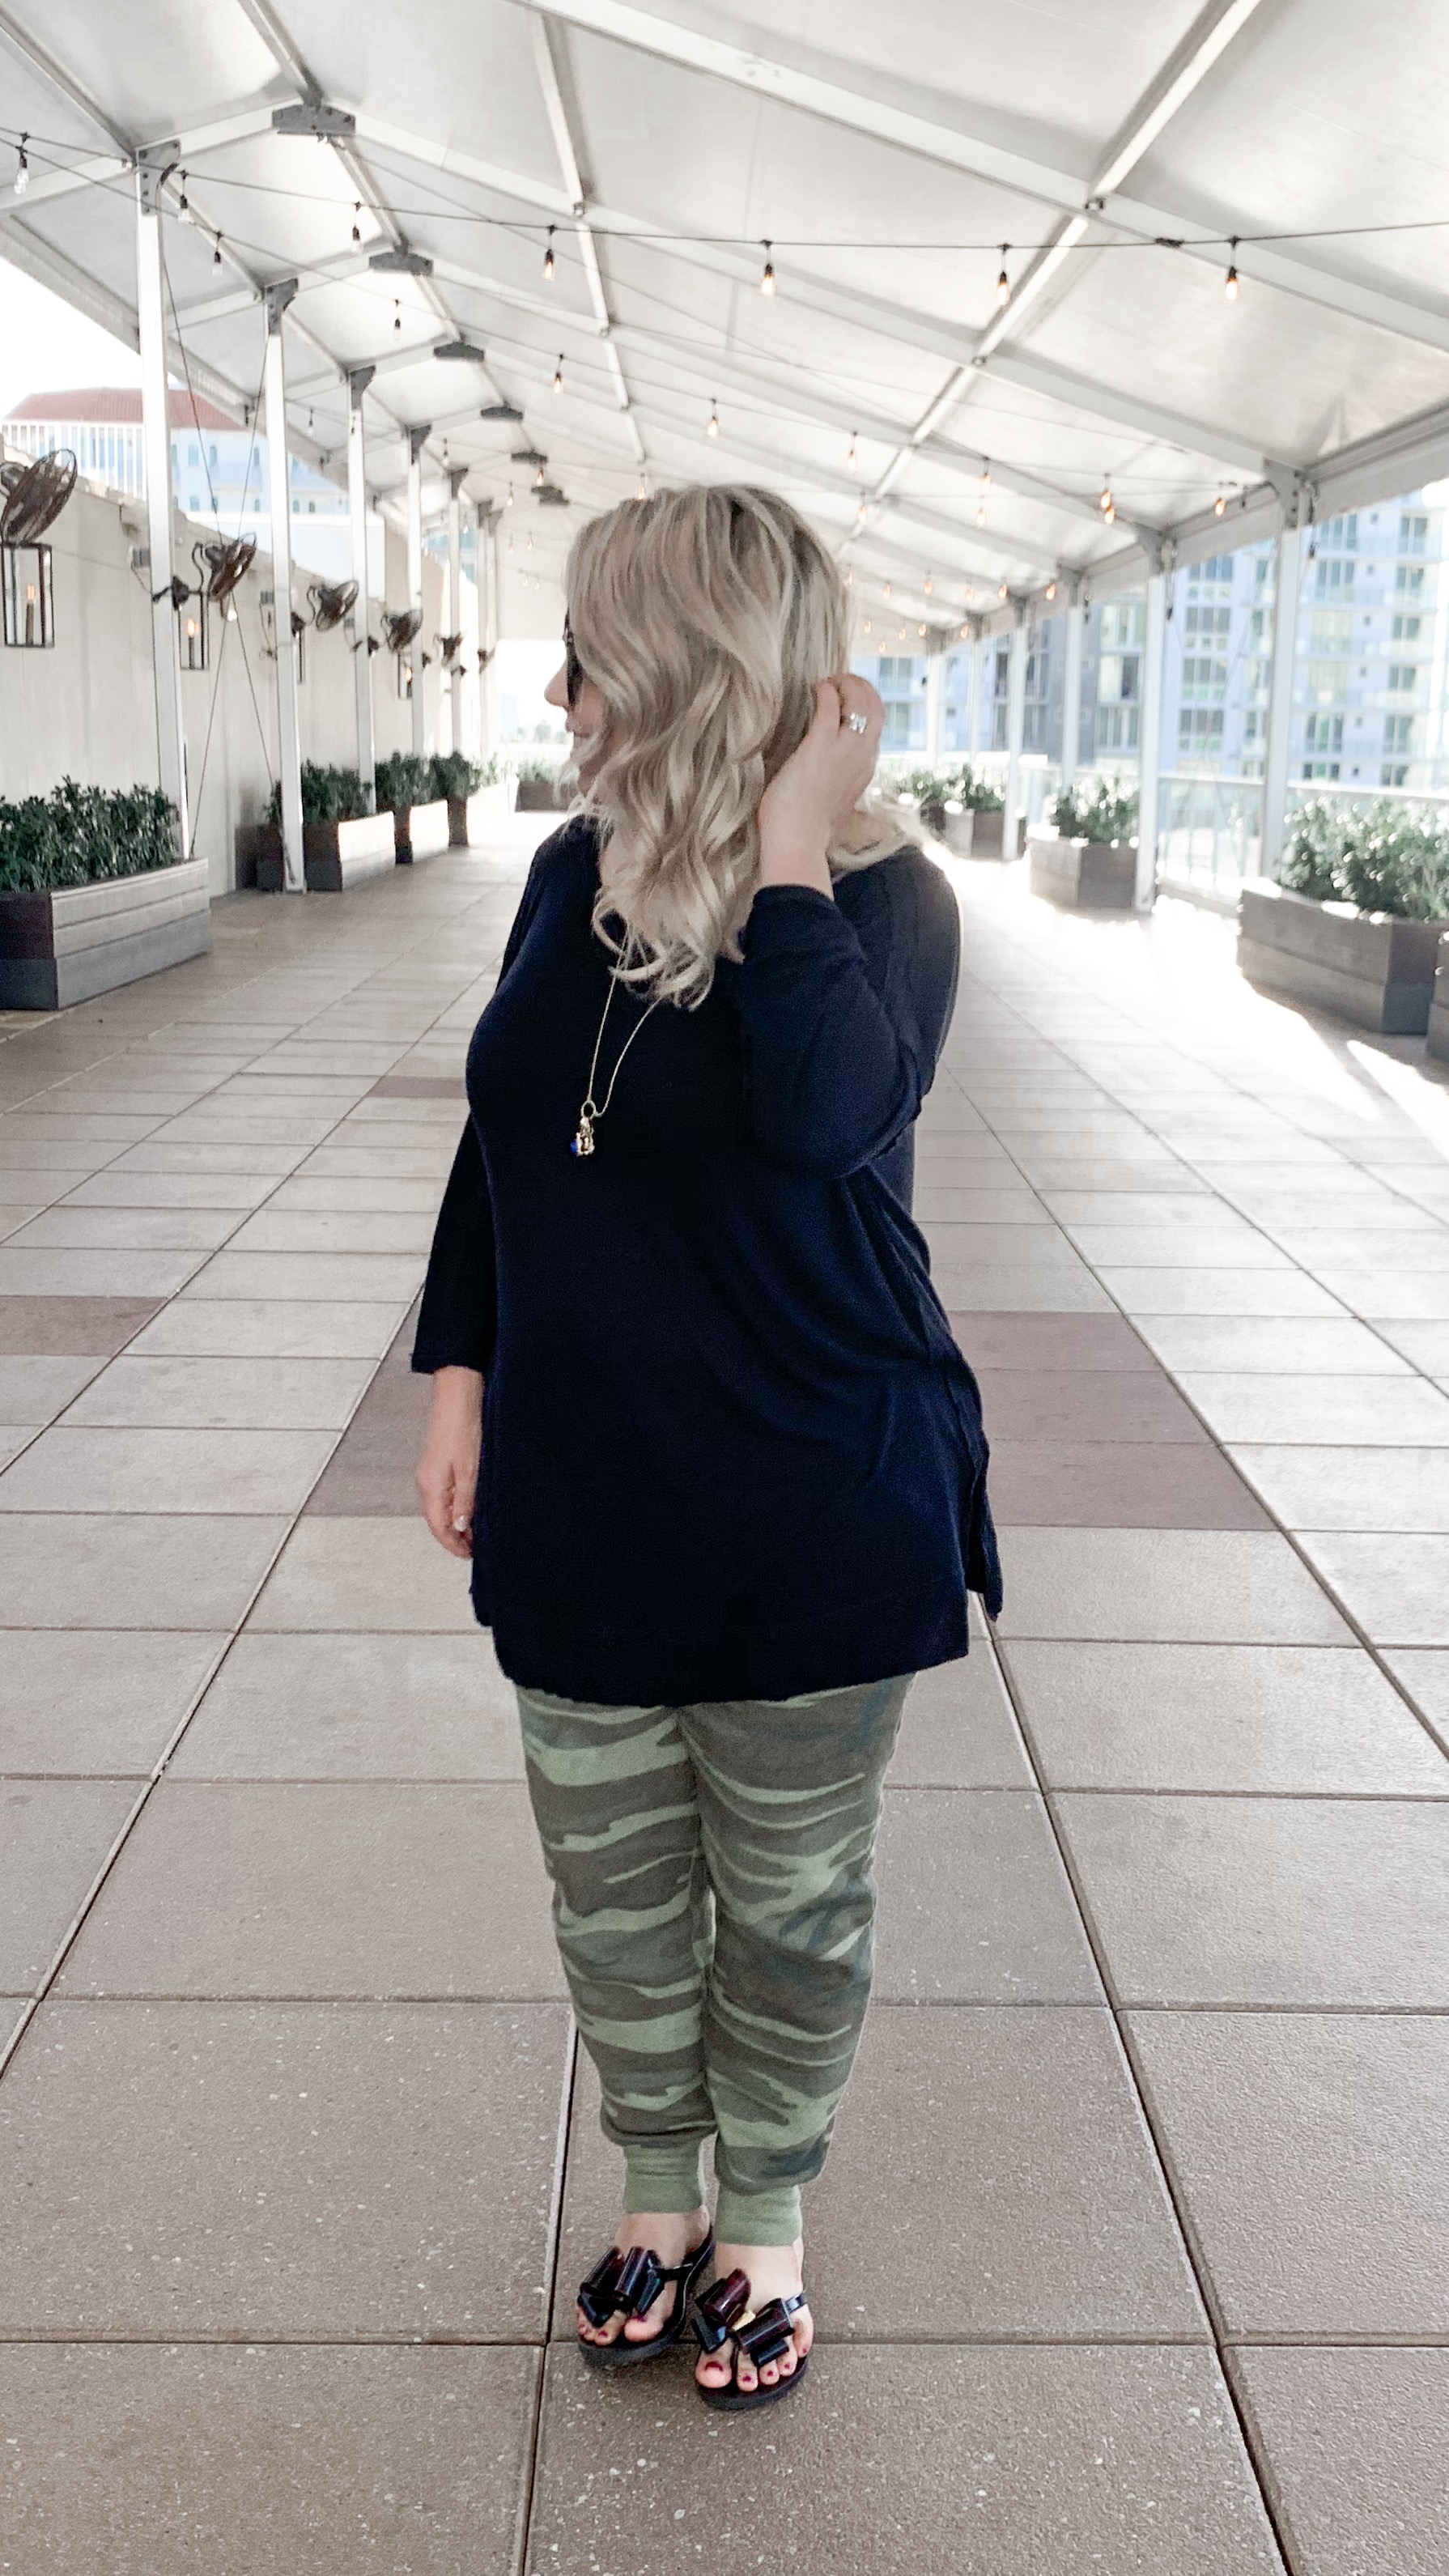 Camo outfit with joggers